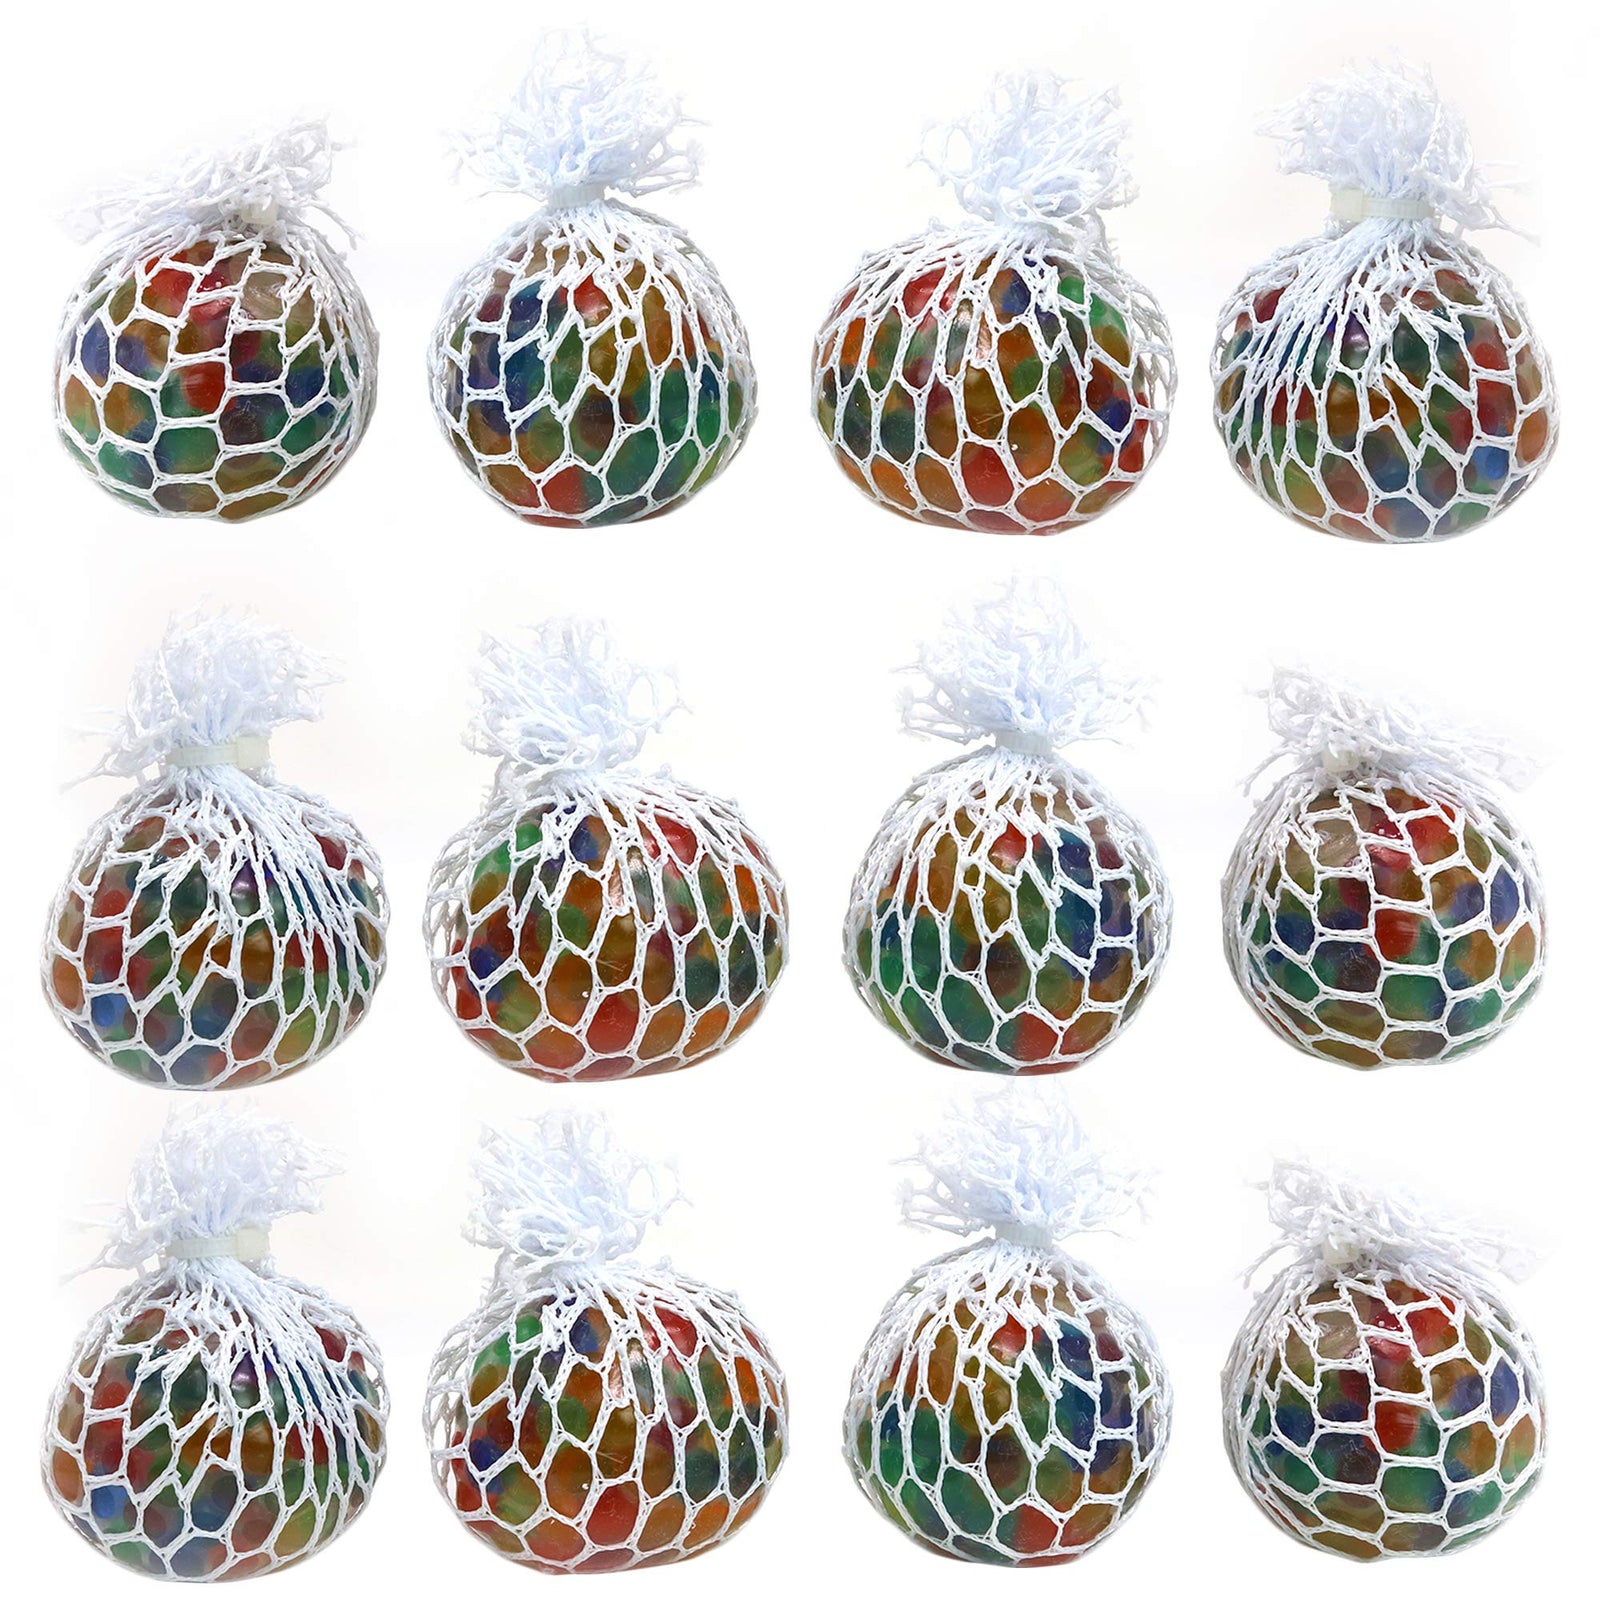 Big Mo's Toys Mesh Balls - Squishy Fidget Balls Stress Reliever Party Favors - 12 Pack